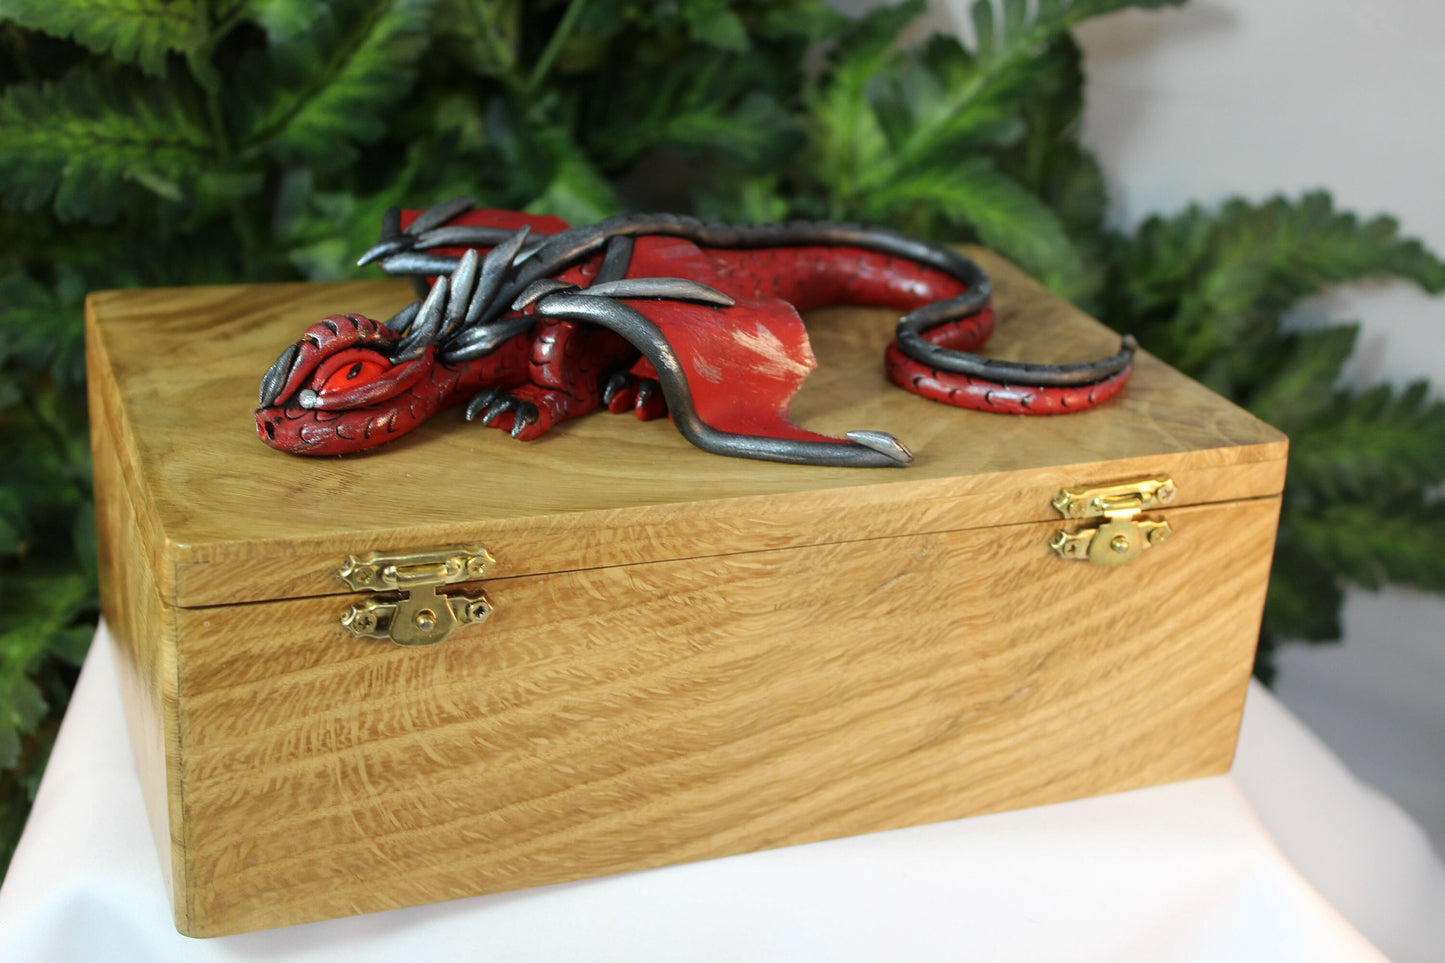 Polymer Clay Red and Black Dragon on Natural Wood Box - 1-089